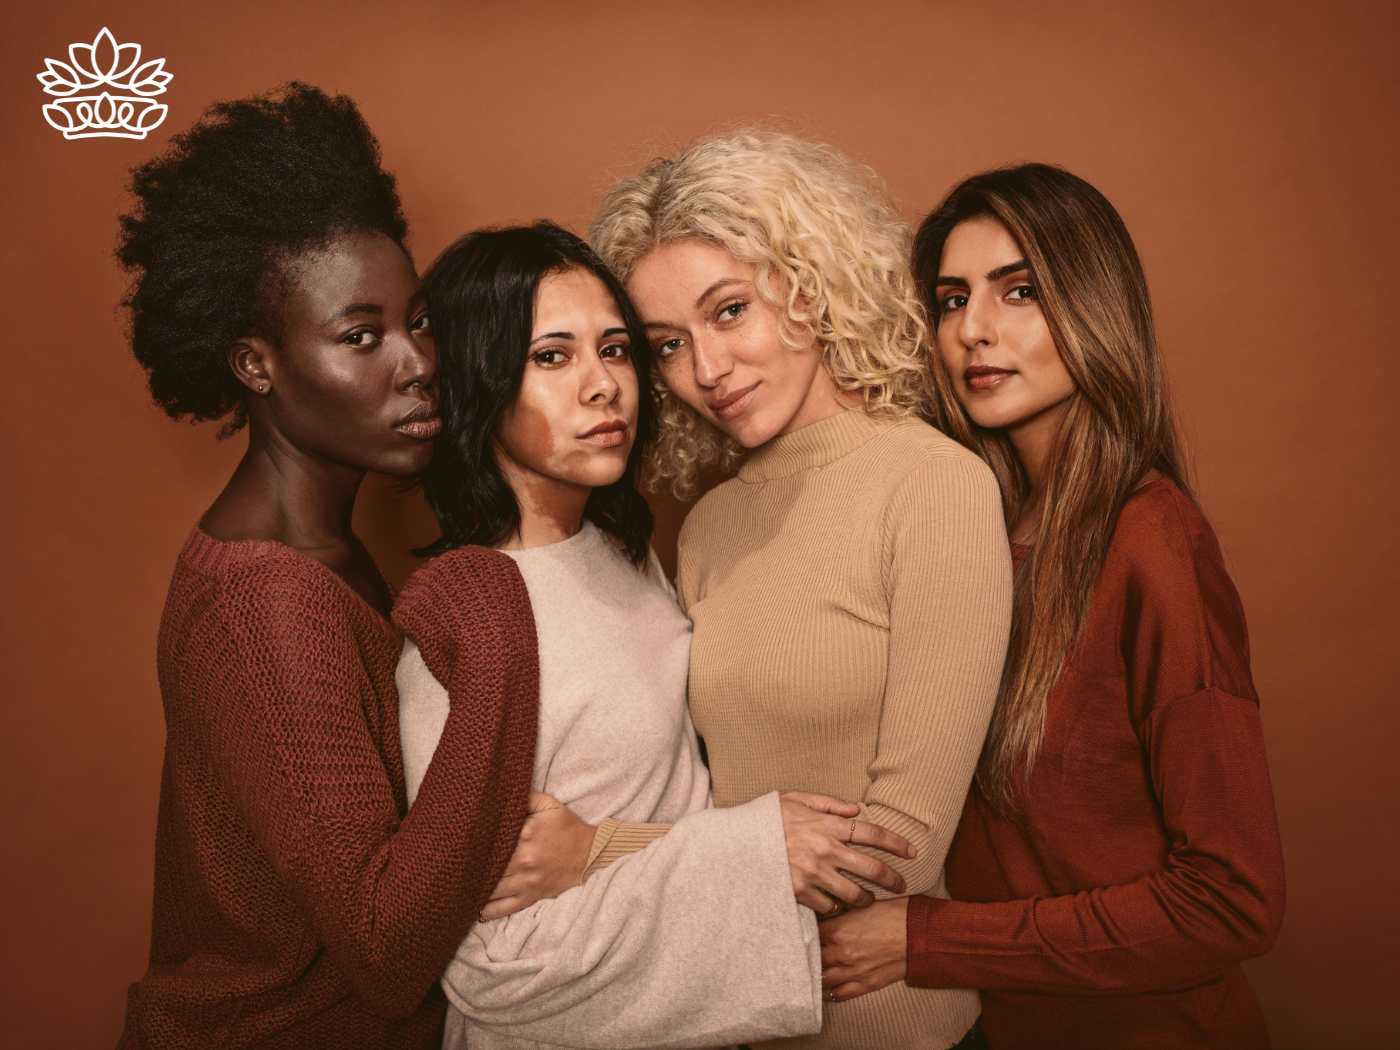 Four women of different ethnicities closely embracing, portraying strong and diverse beauty in warm-toned sweaters. Perfect for celebrating connections with gift hampers including body lotion, milk chocolate, and white chocolate from the Gifts Boxes for Women Collection. Fabulous Flowers and Gifts